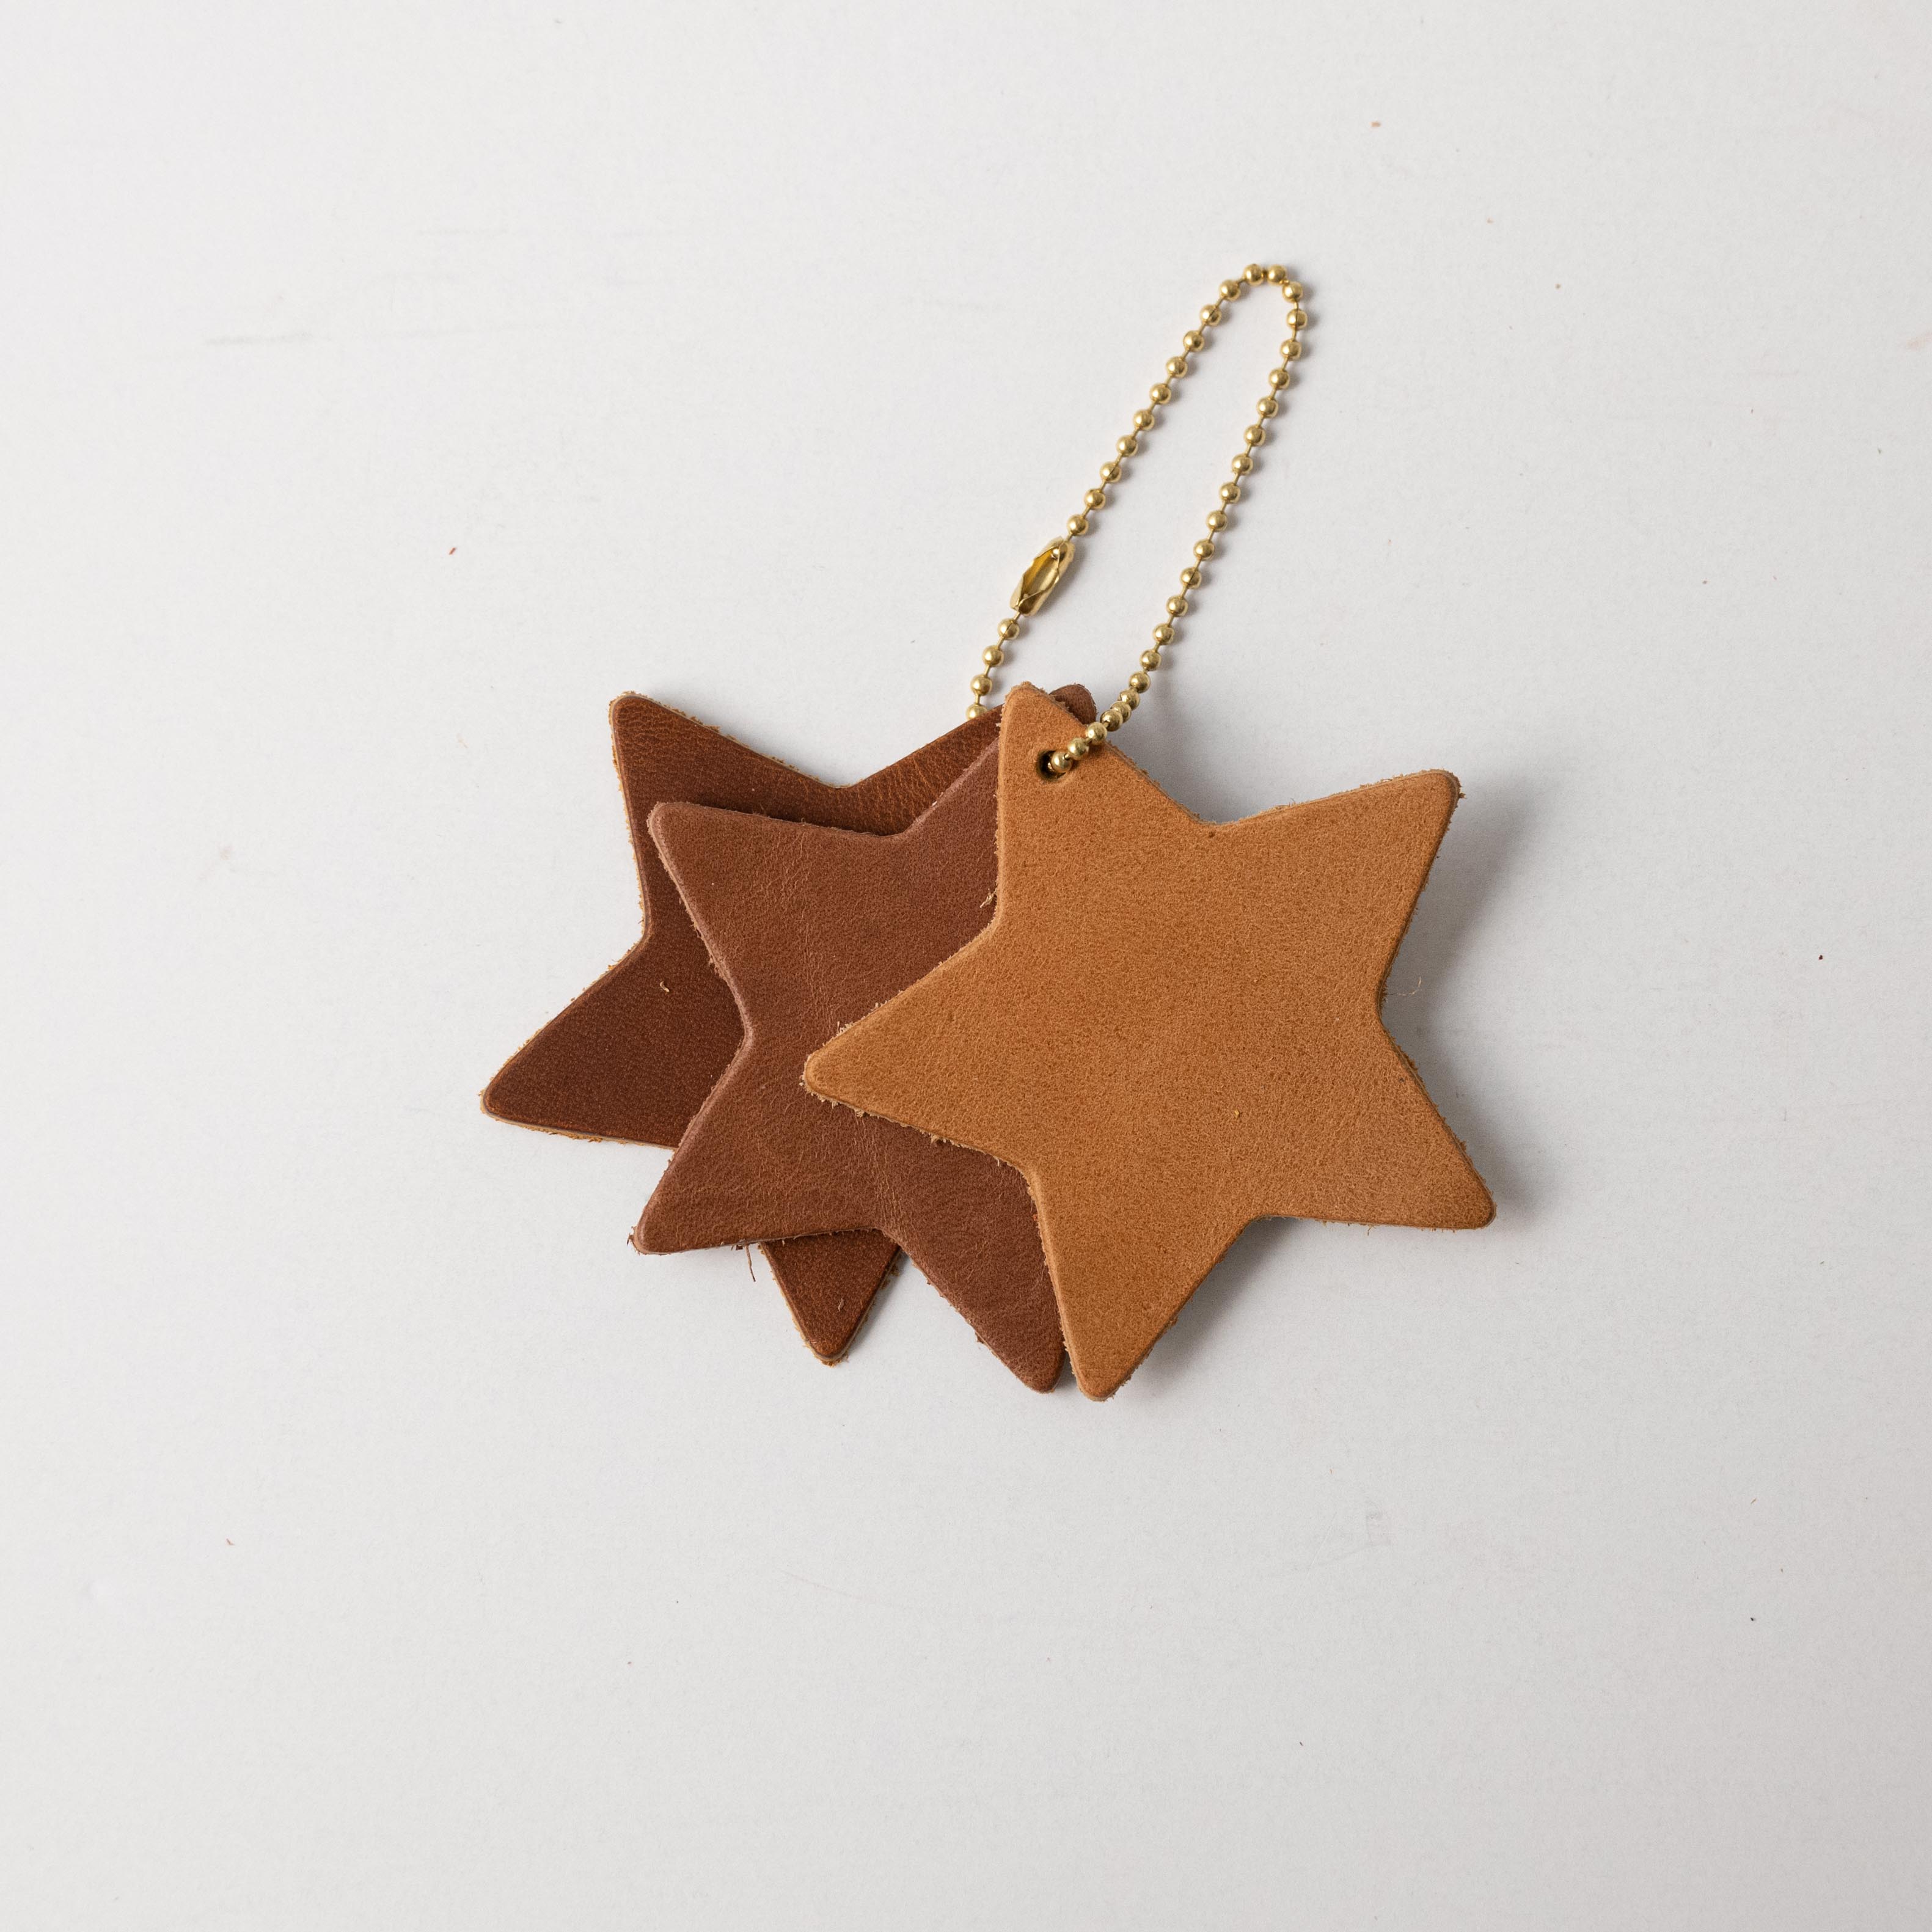 KMM & Co. Tan Star Charms | Leather Bag Charms Handmade in The USA